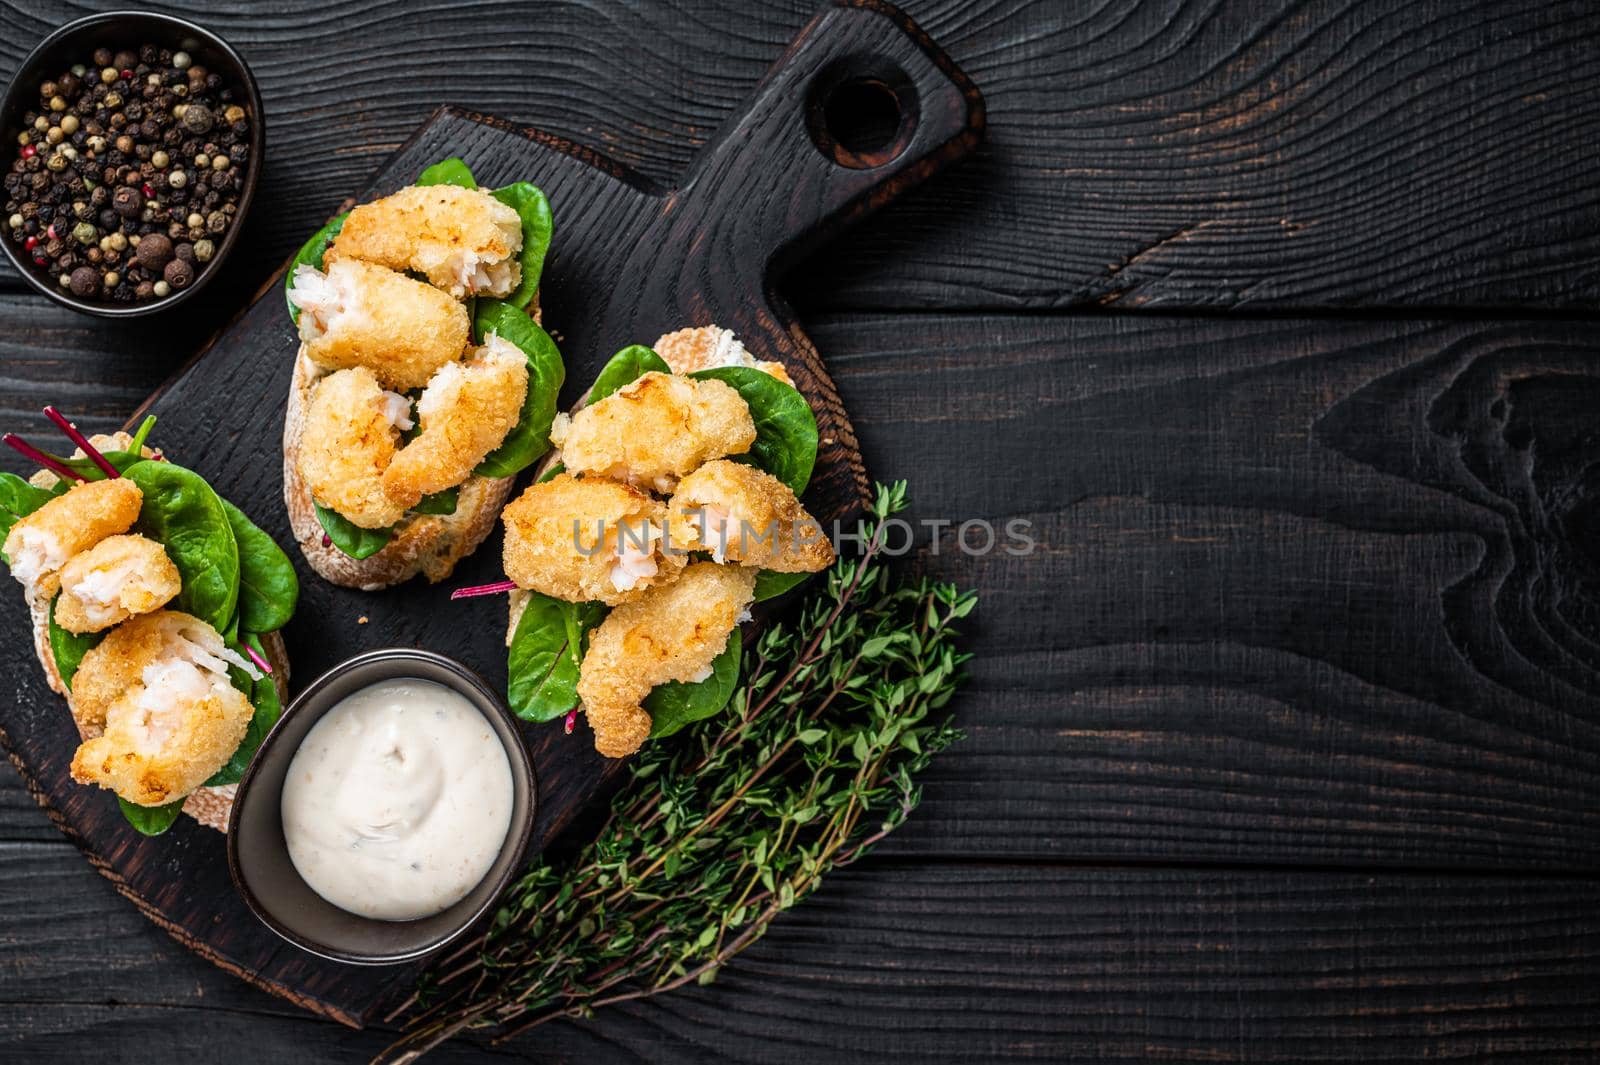 Toasts with Crispy Fried Shrimps Prawns and green salad on a wooden board. Black wooden background. Top view. Copy space.